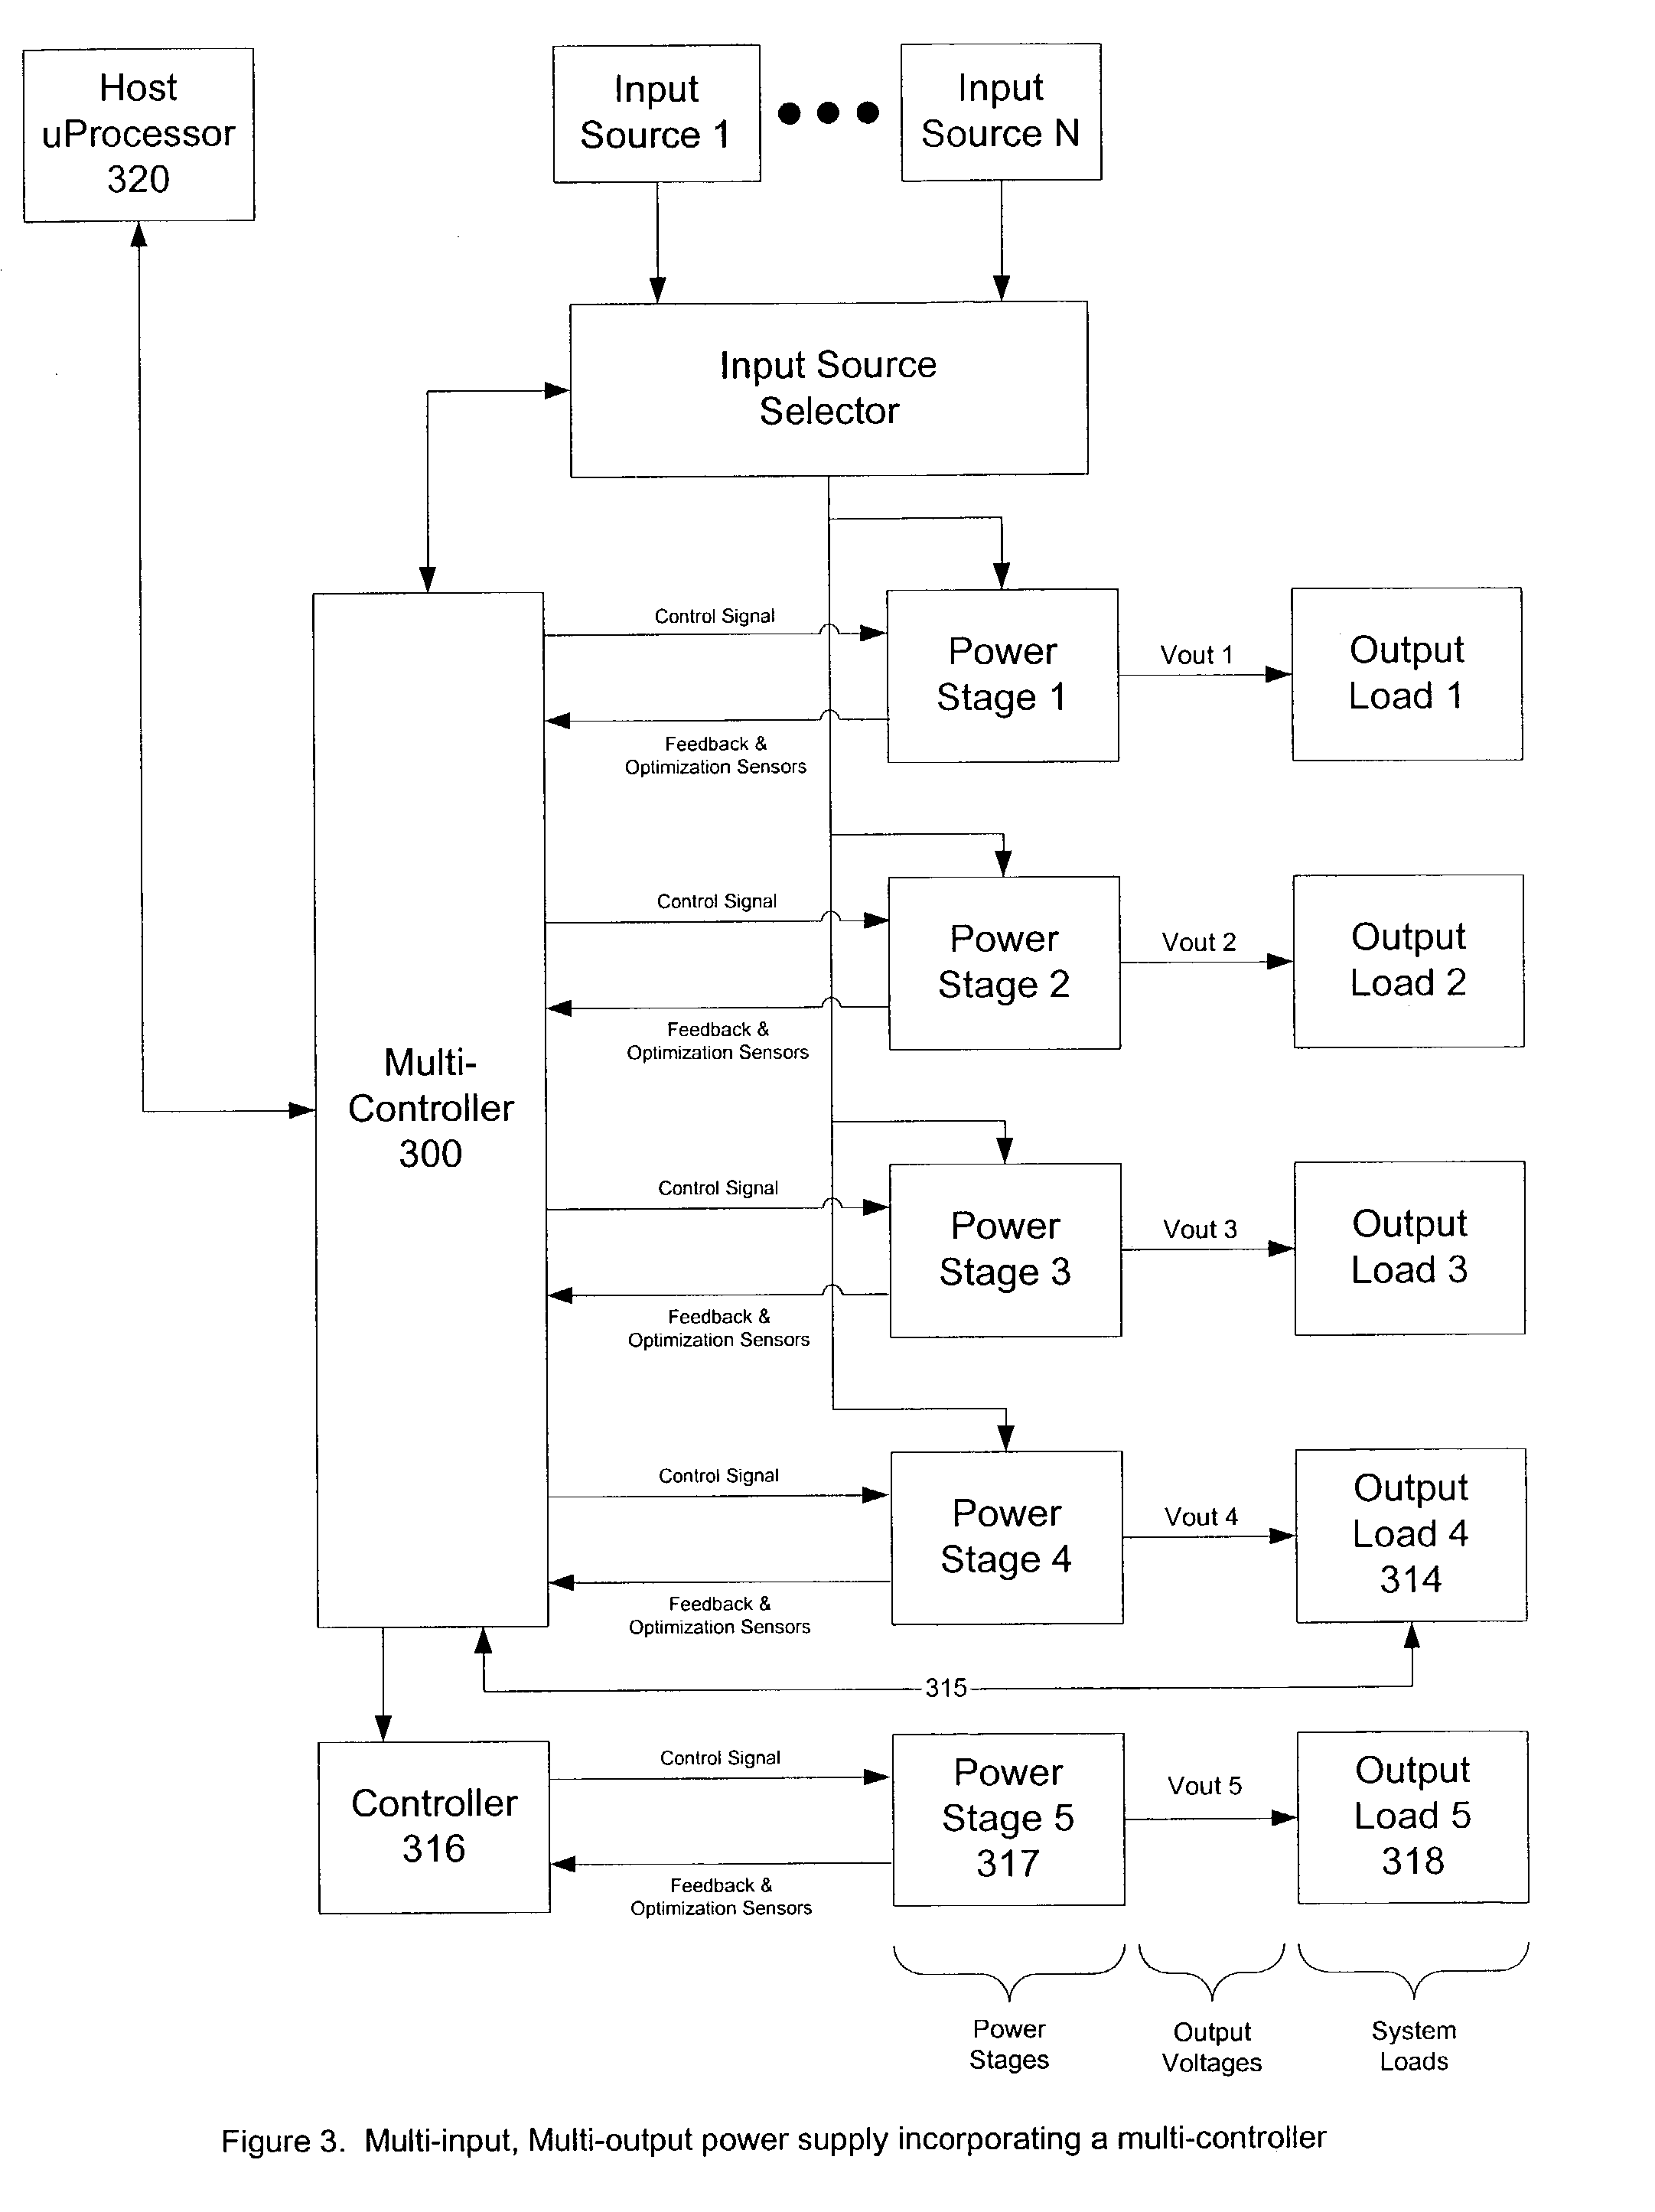 Multi-output power supply design system